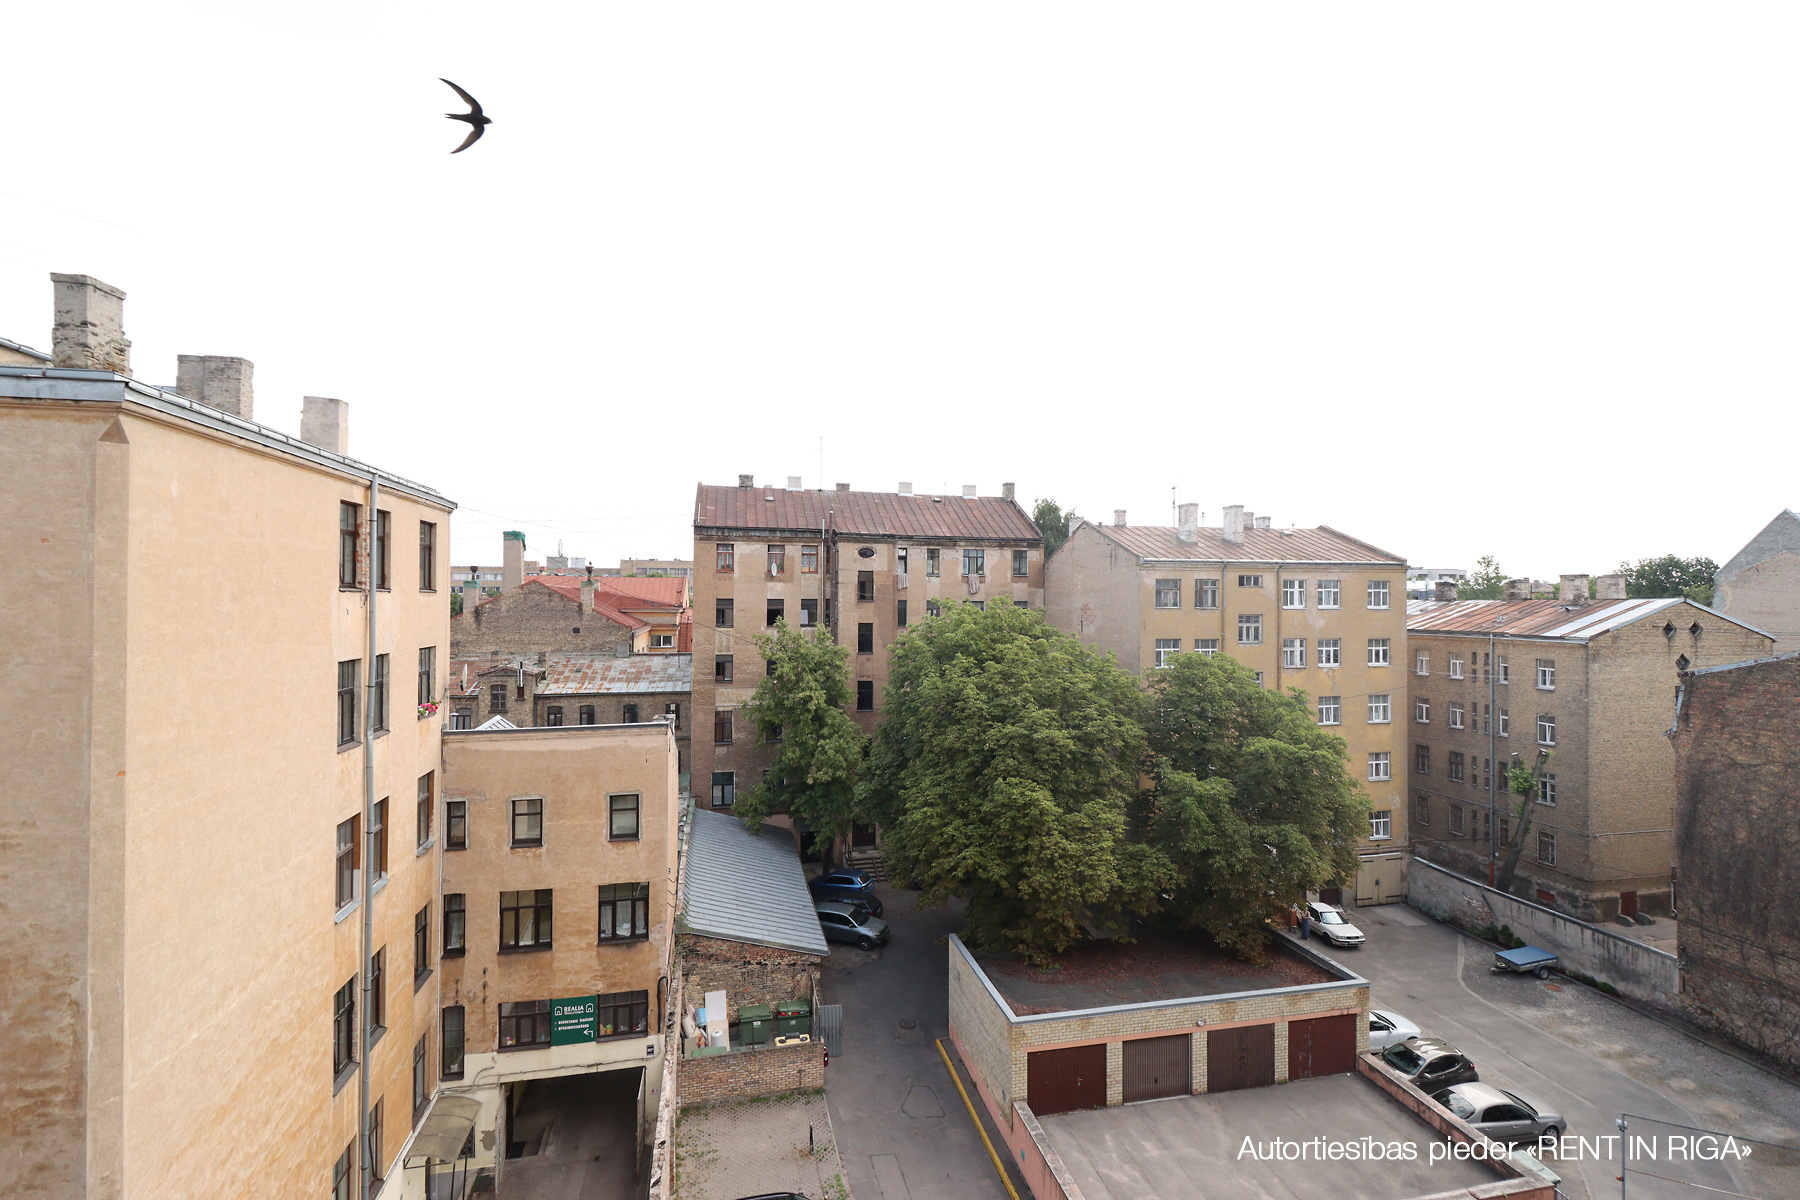 Apartment for rent, Ģertrūdes street 105 - Image 1